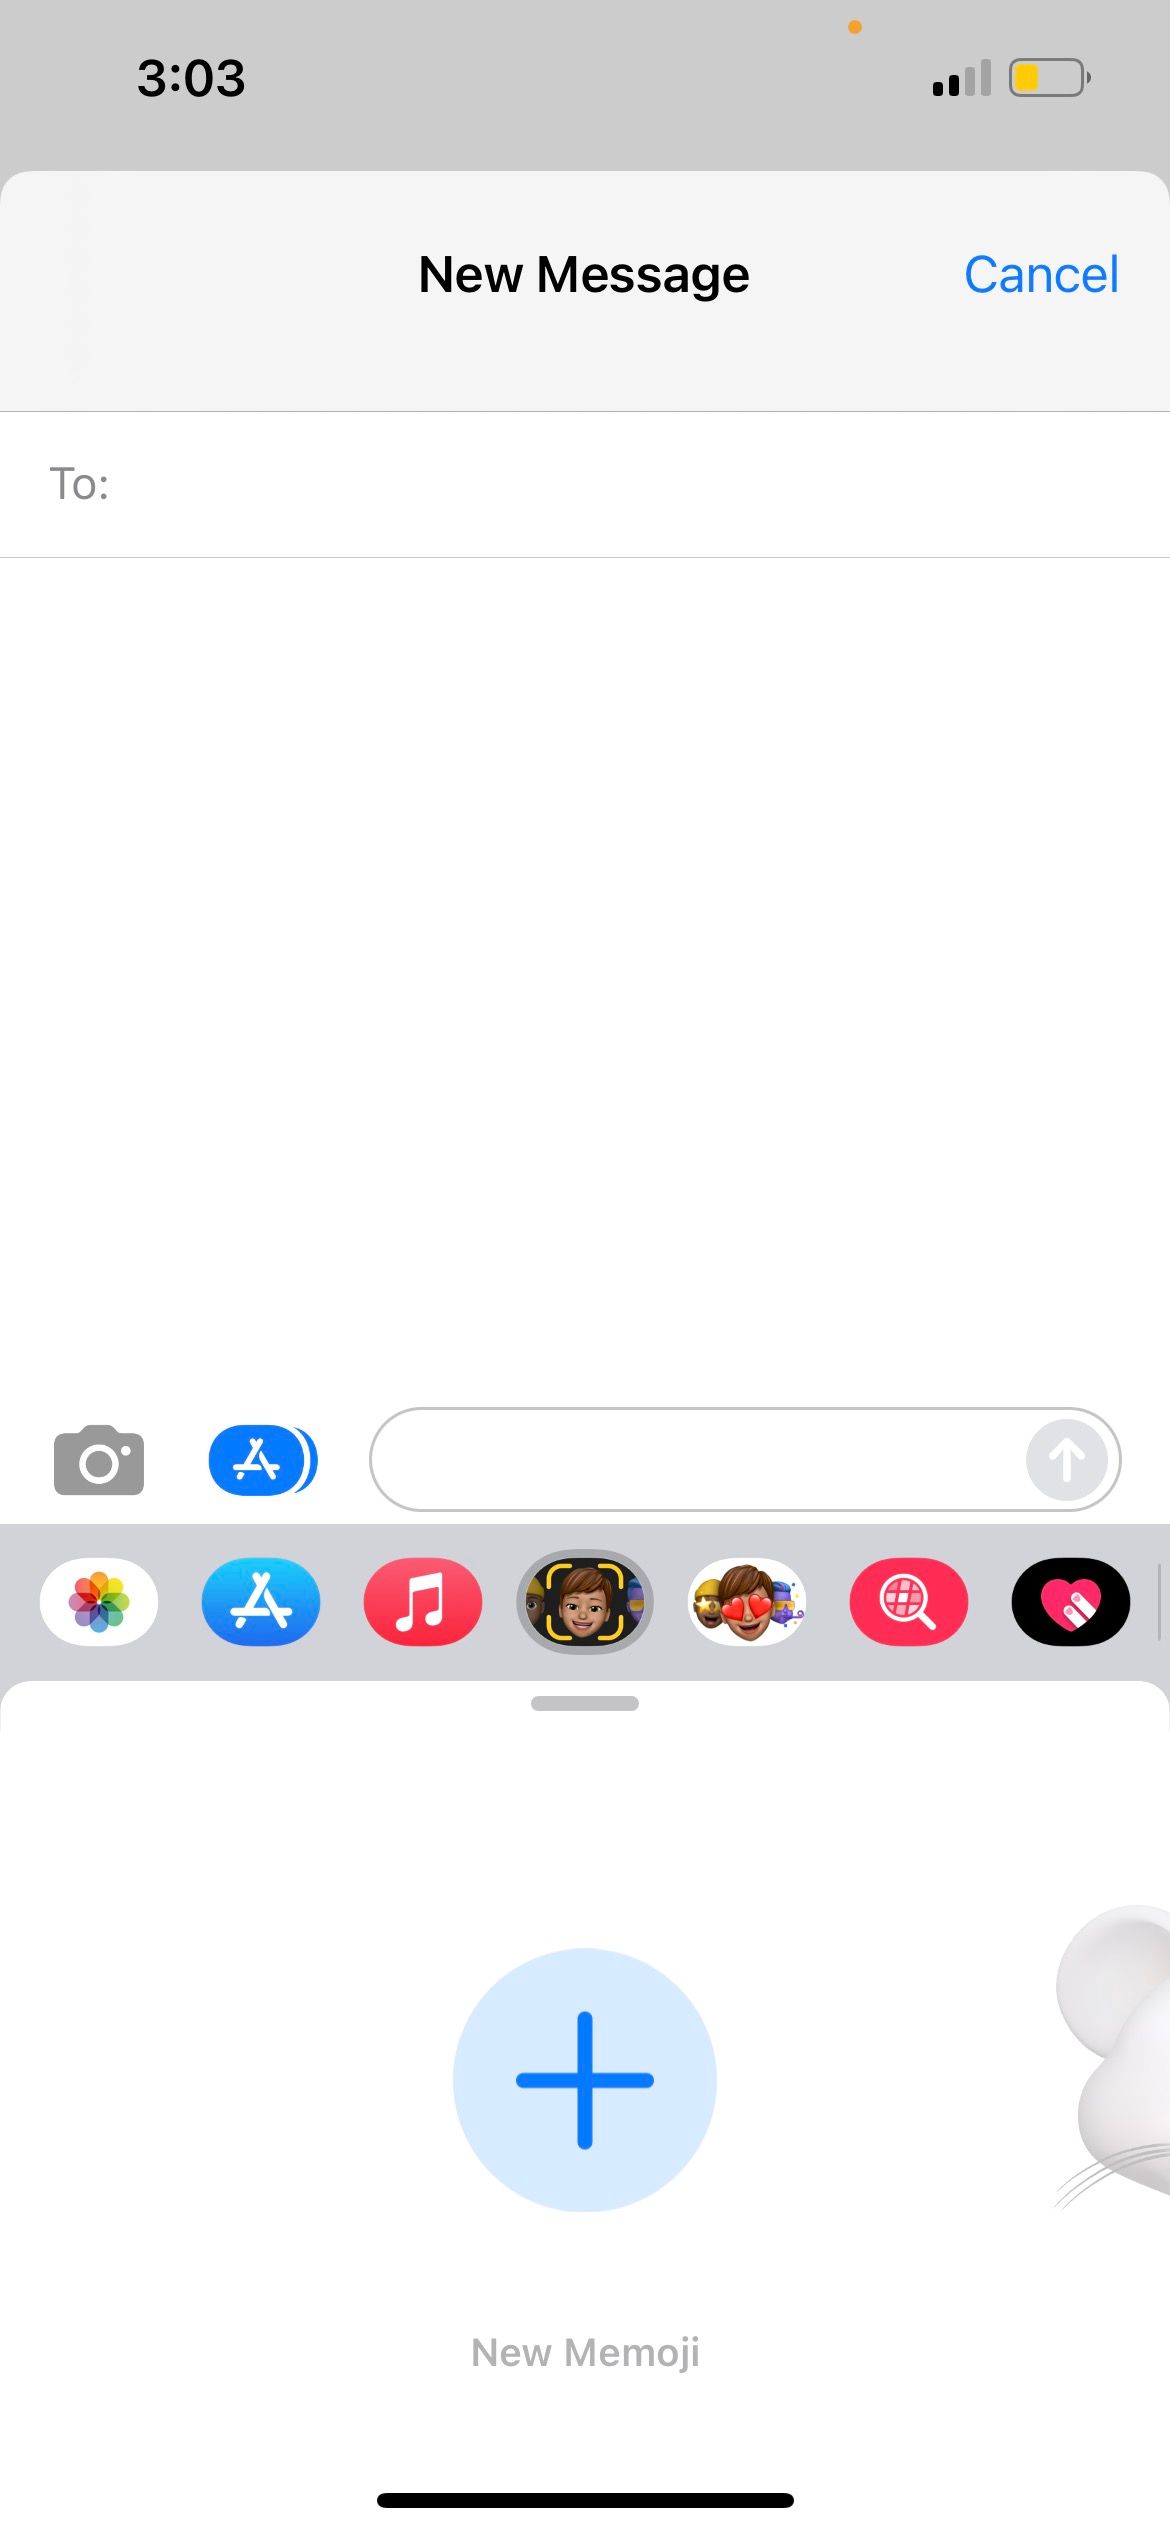 new memoji button in iphone messages app